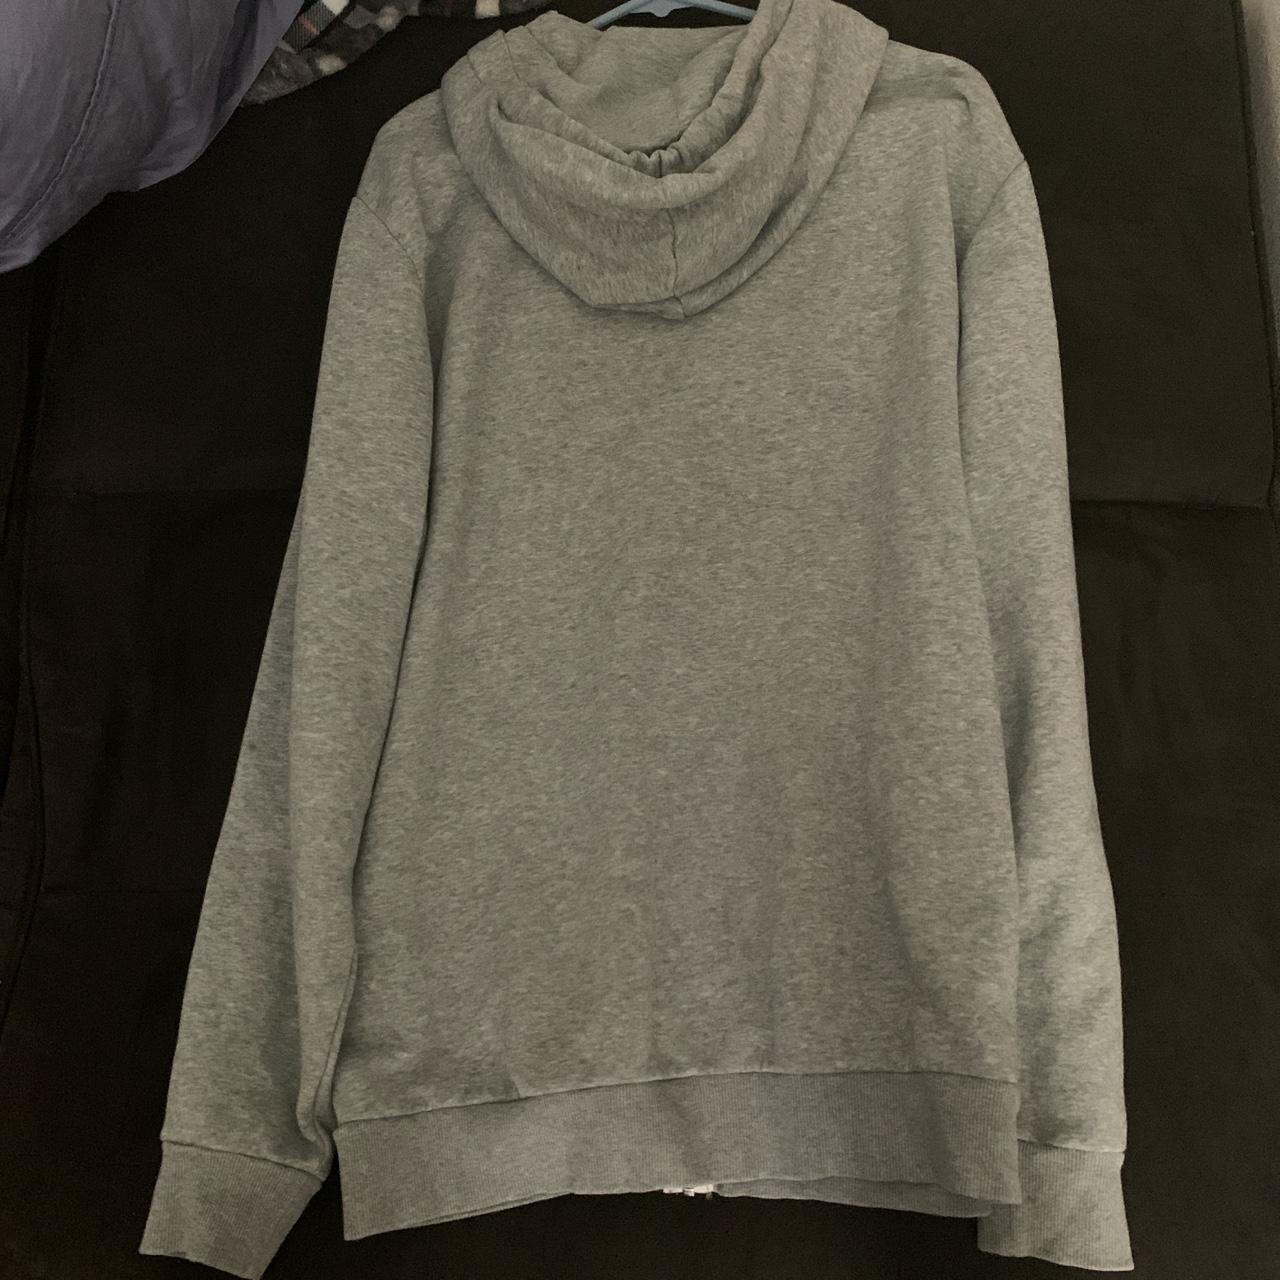 Converse Men's Grey and White Jumper (2)